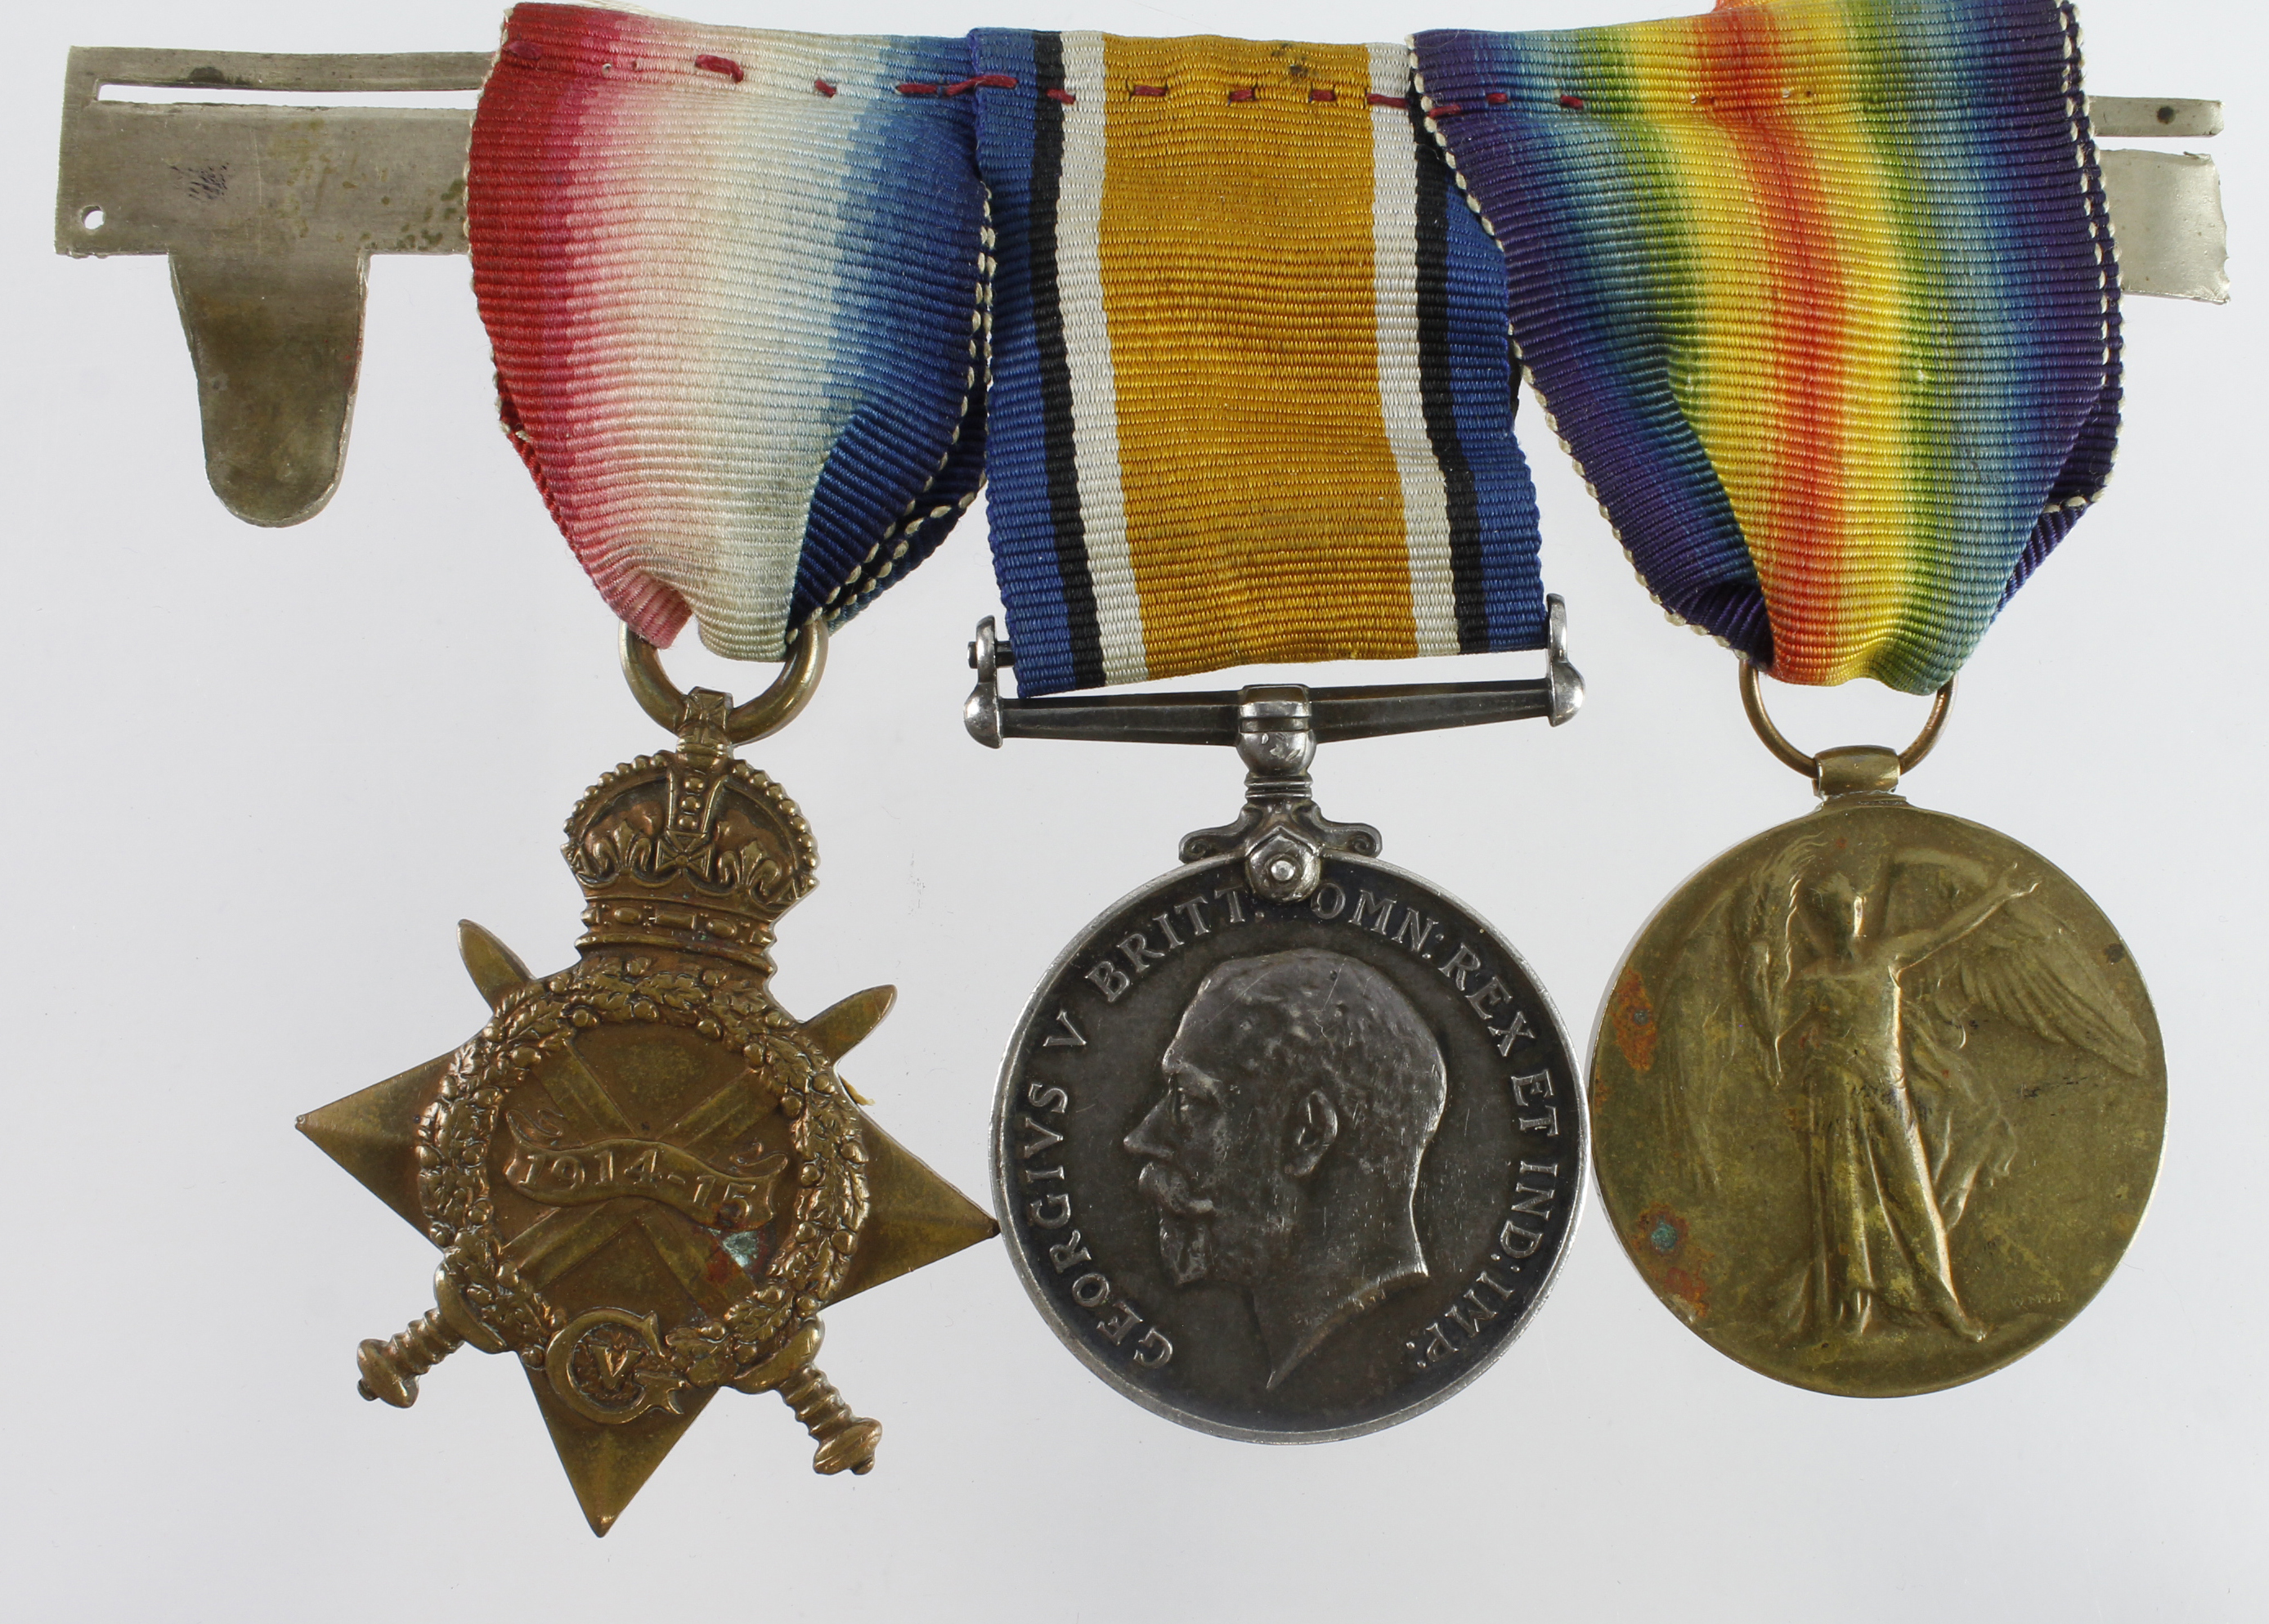 1915 Star Trio (1991 Pte G Lowe North'D Fus) Sjt on pair. Entitled to the Military Medal L/G 9/7/